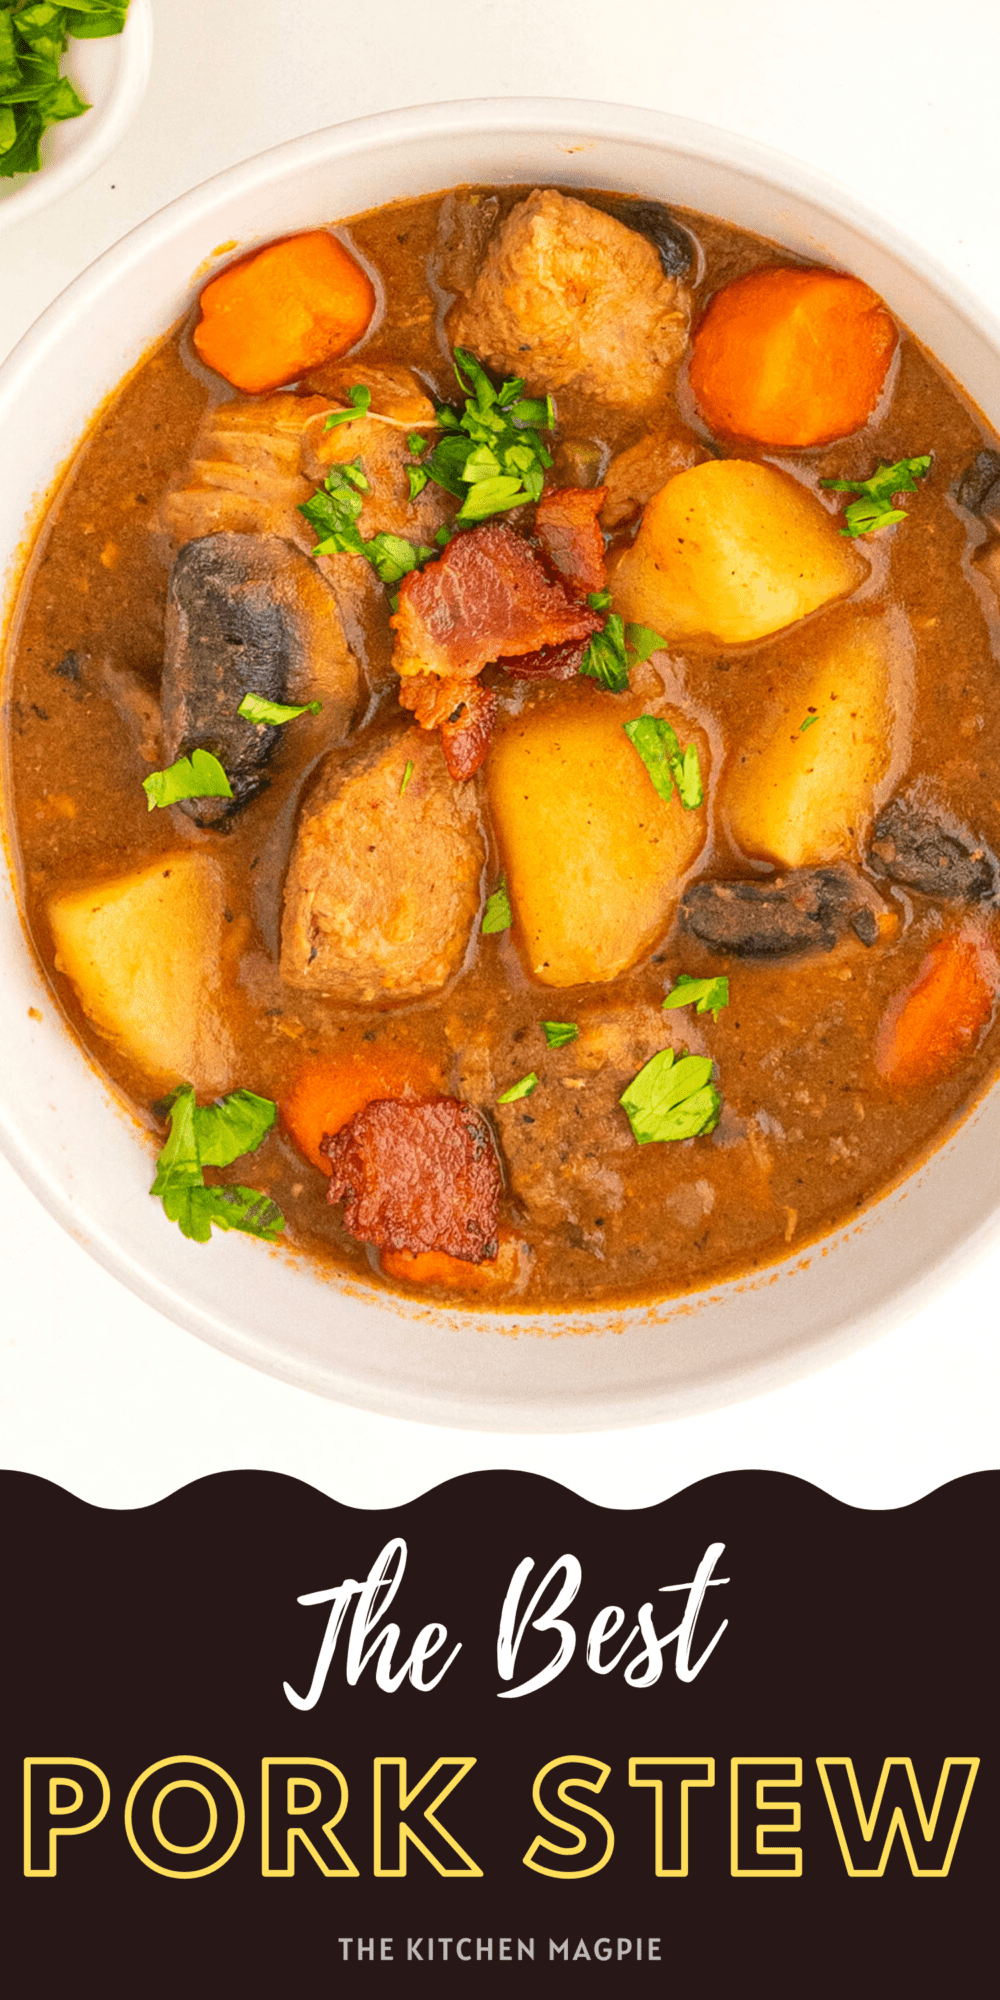 This easy and delicious homestyle pork stew is the perfect hot, filling meal that's loaded with root vegetables and tender, falling-apart pork shoulder.